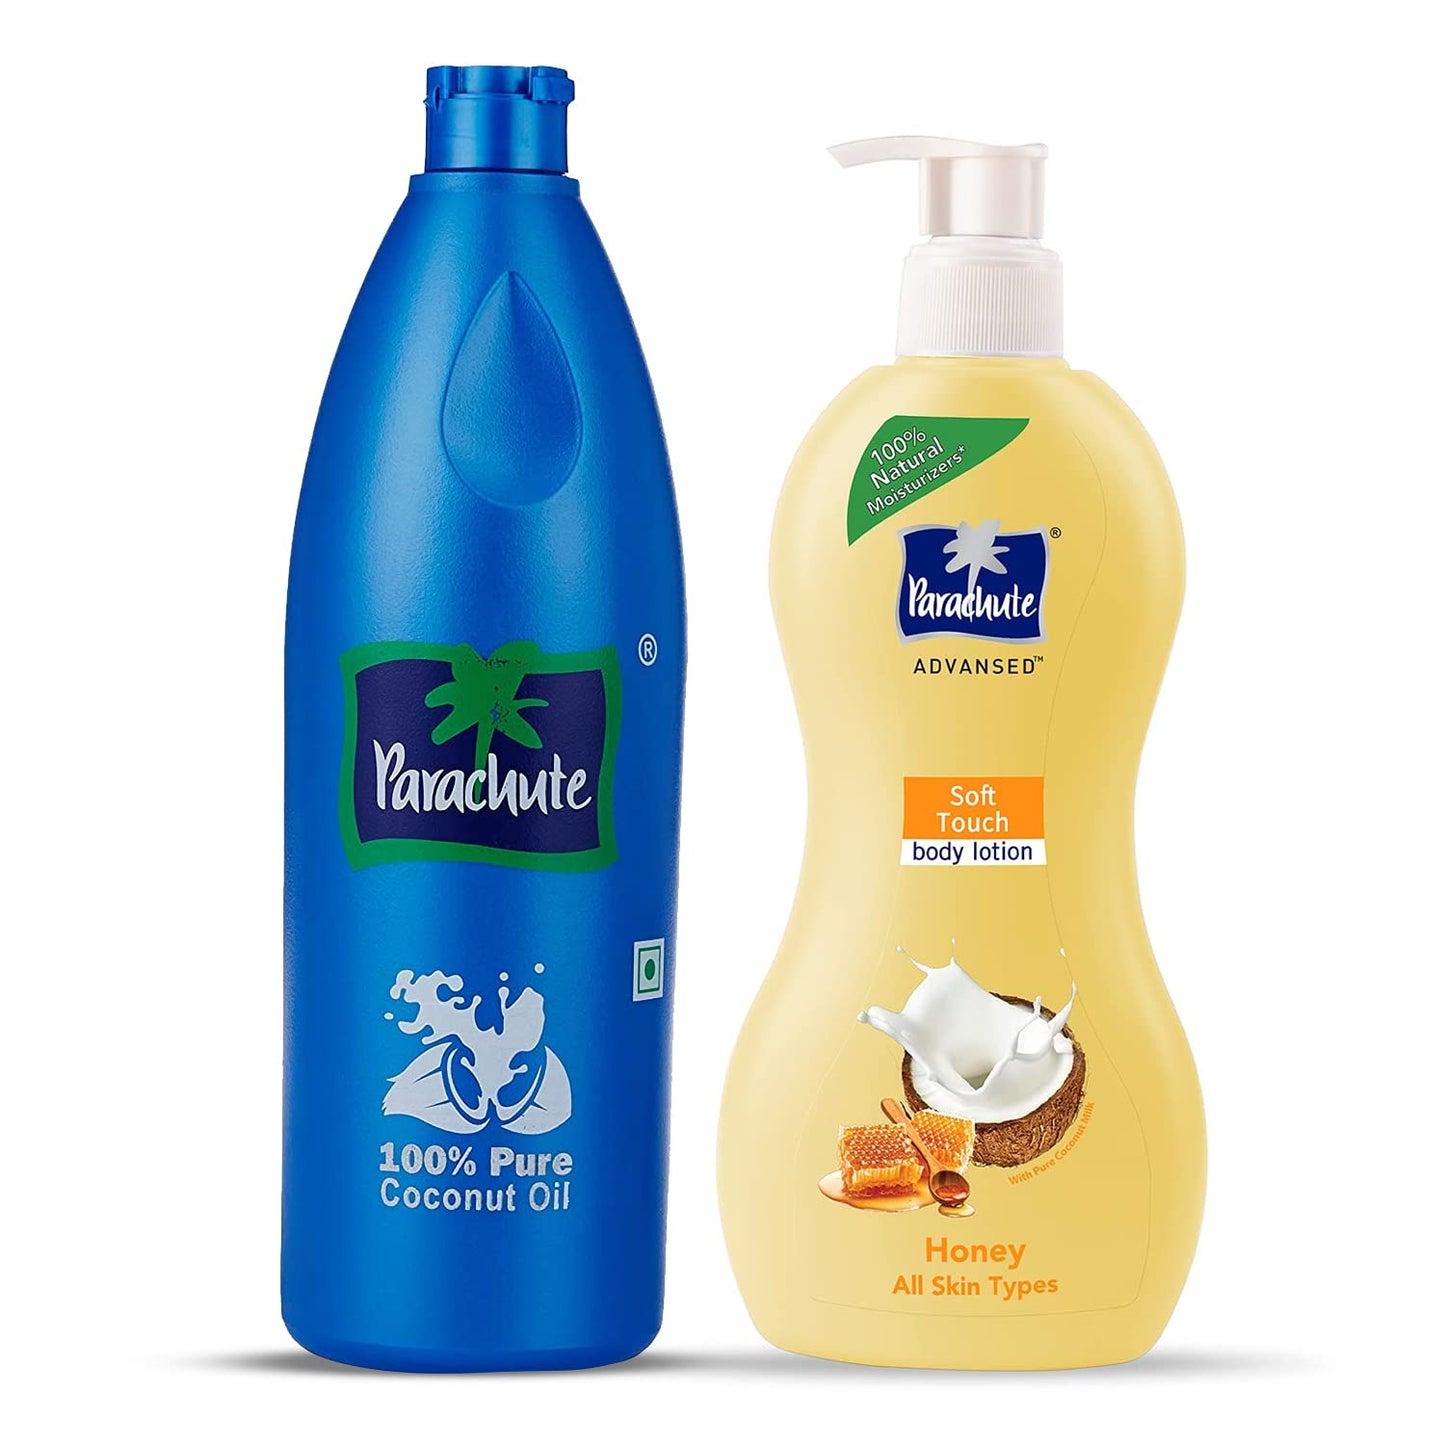 Parachute 100 % Pure Coconut Oil (600 ml) And Parachute Advansed Body Lotion Soft Touch (400ml) - Combo Pack